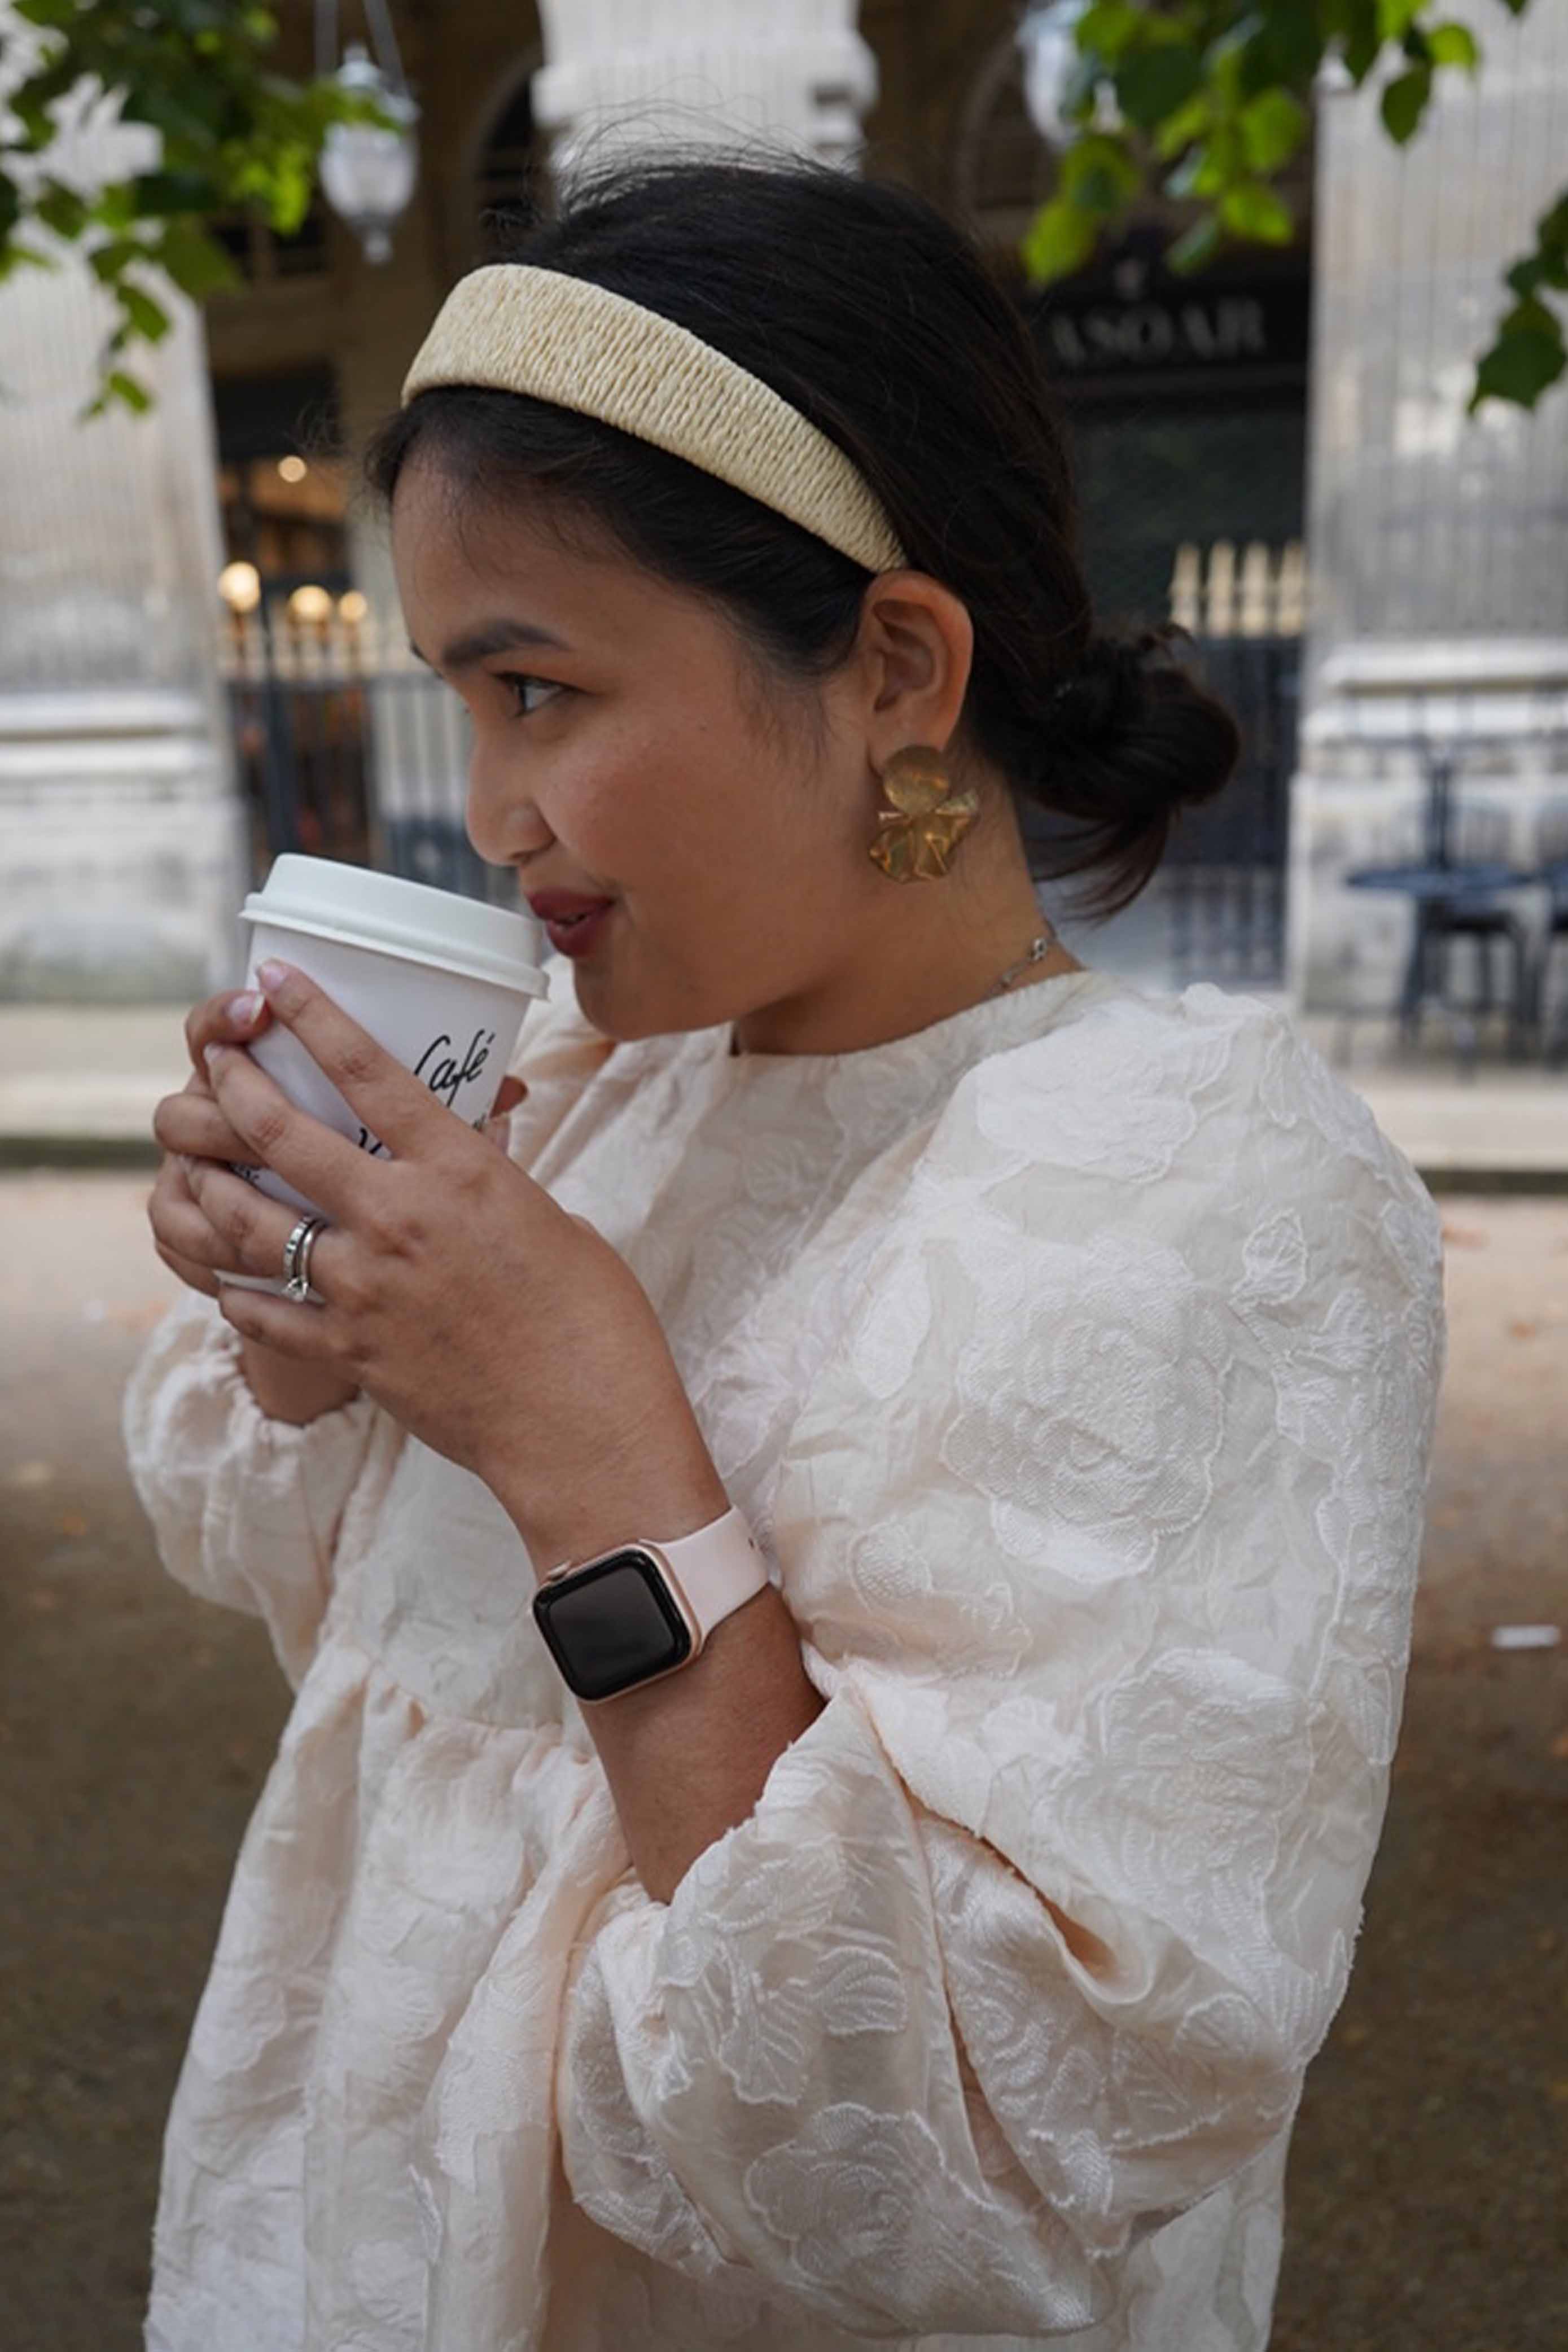 Female model sipping on her coffee in paris. while wearing high quality french inspired top made by petit moi